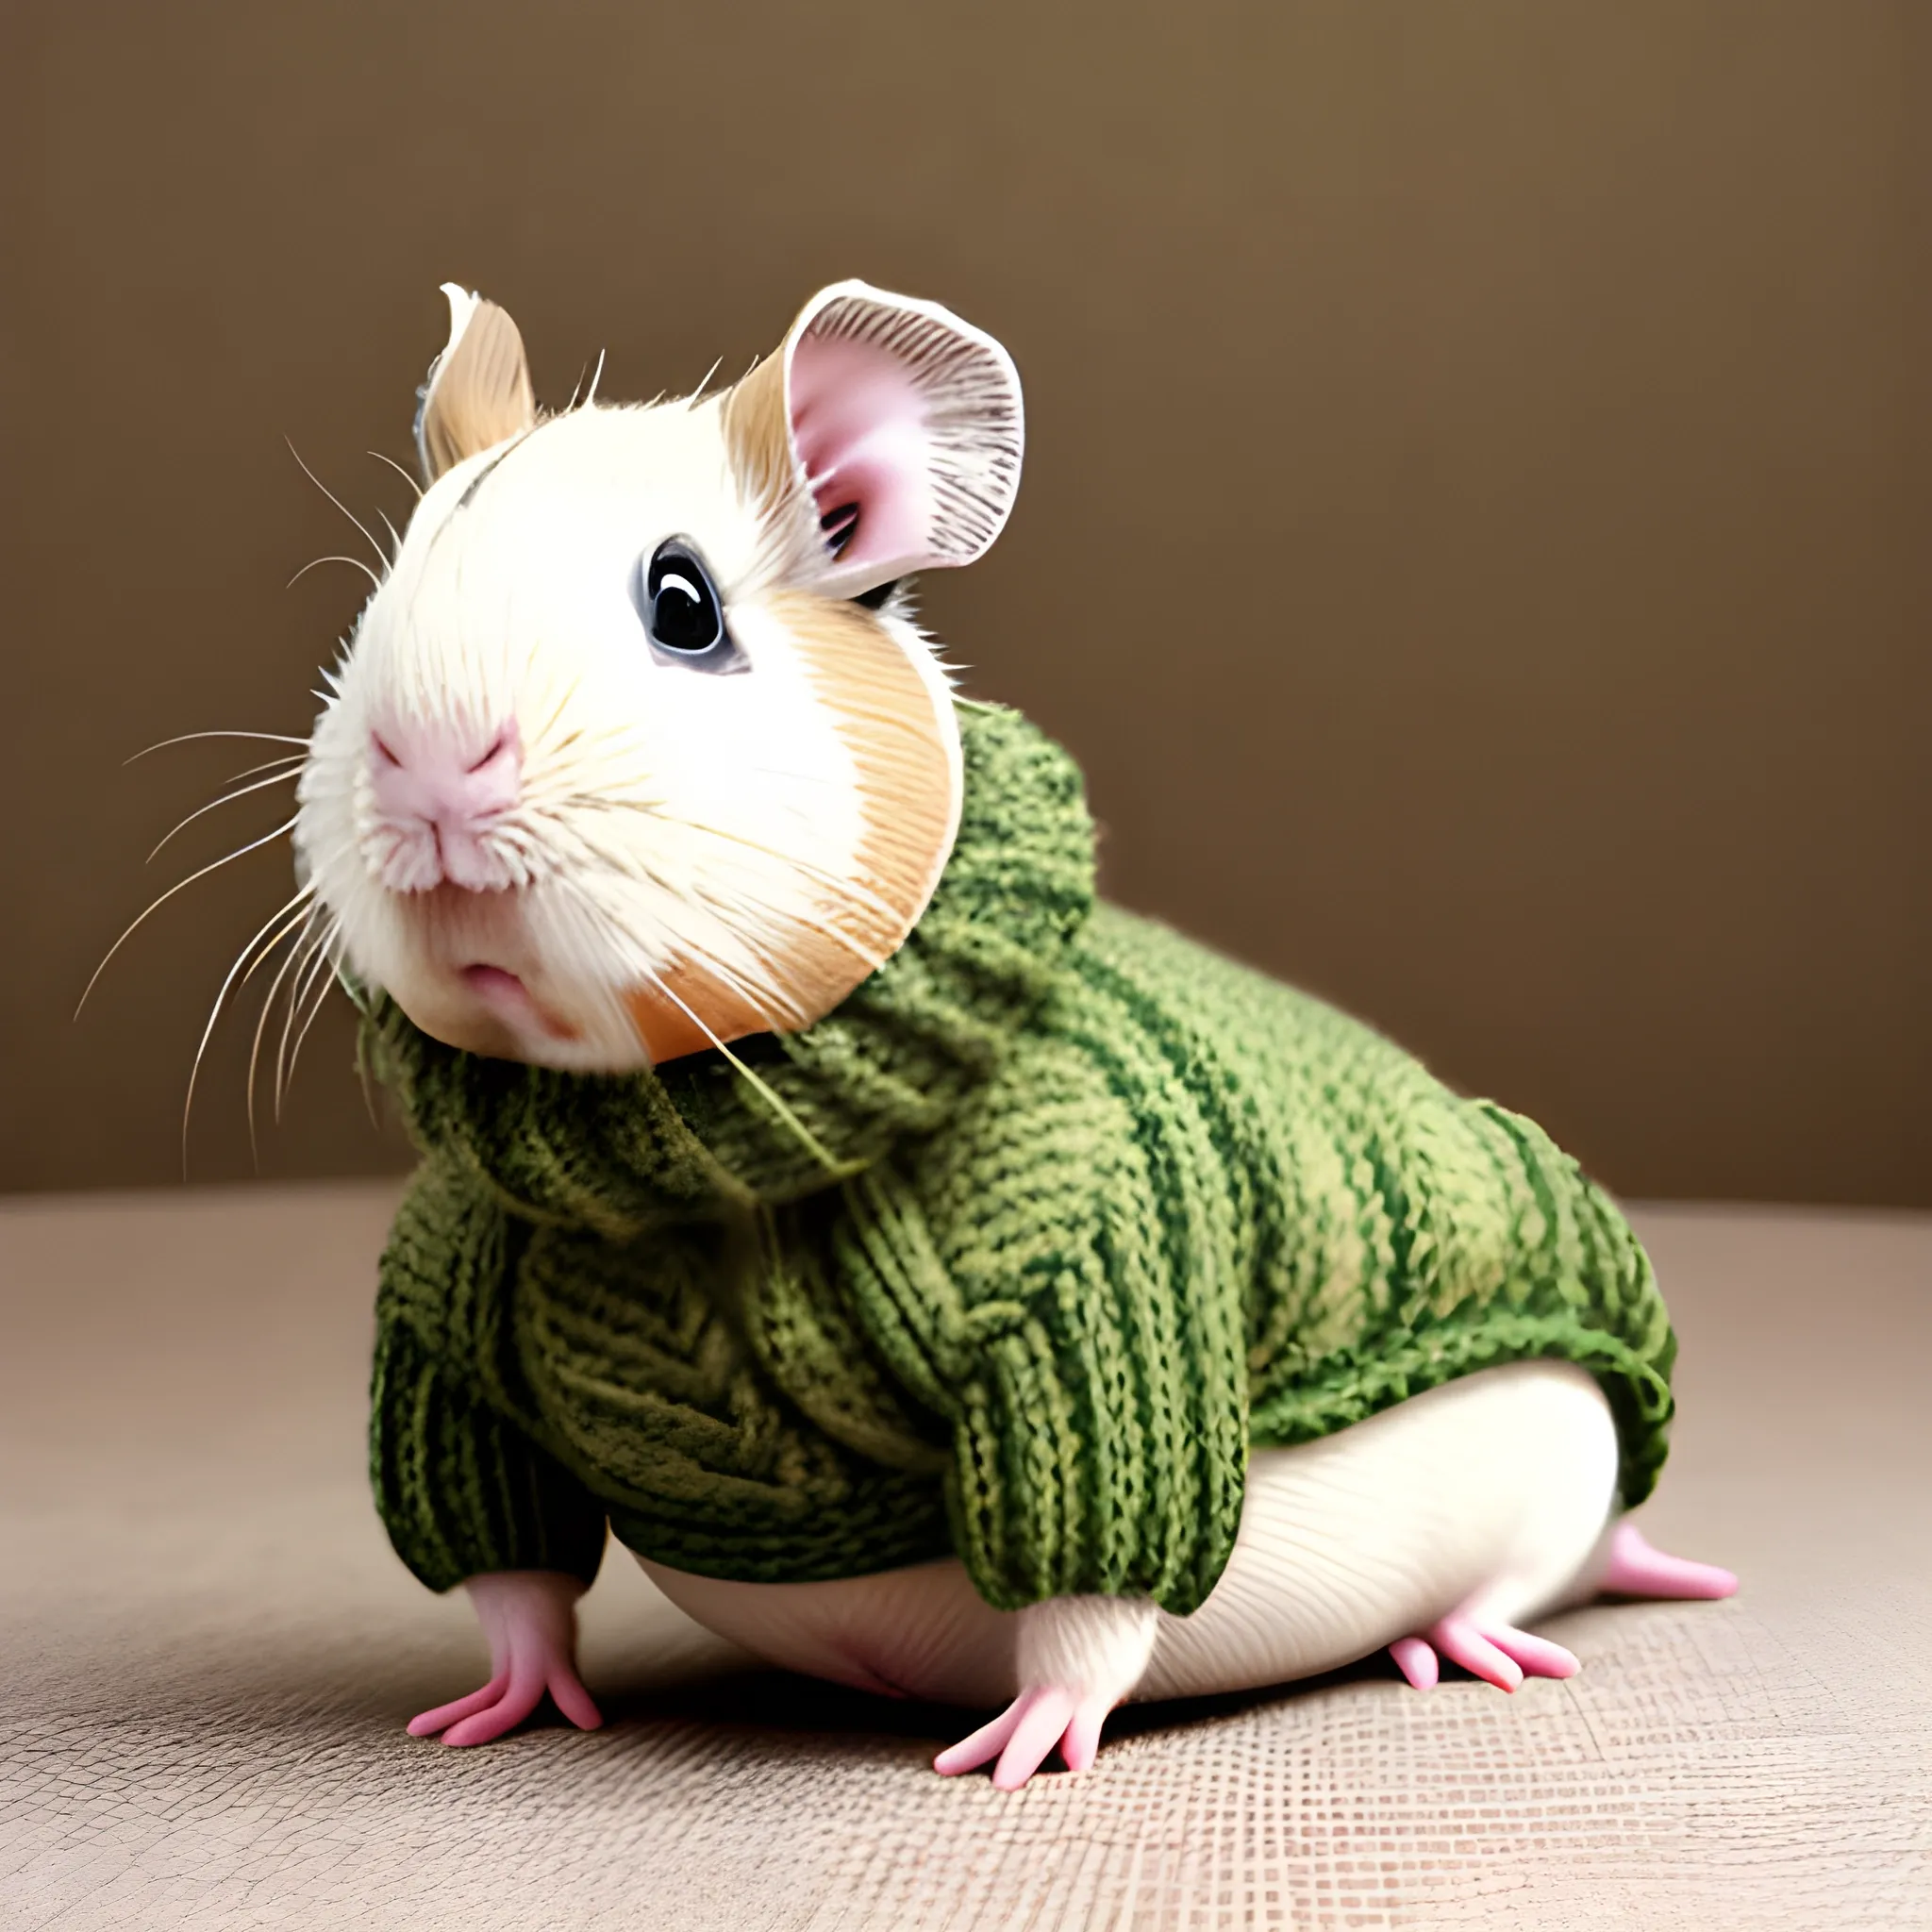 image of knitting pattern of beige guinea pig on green knit sweater

